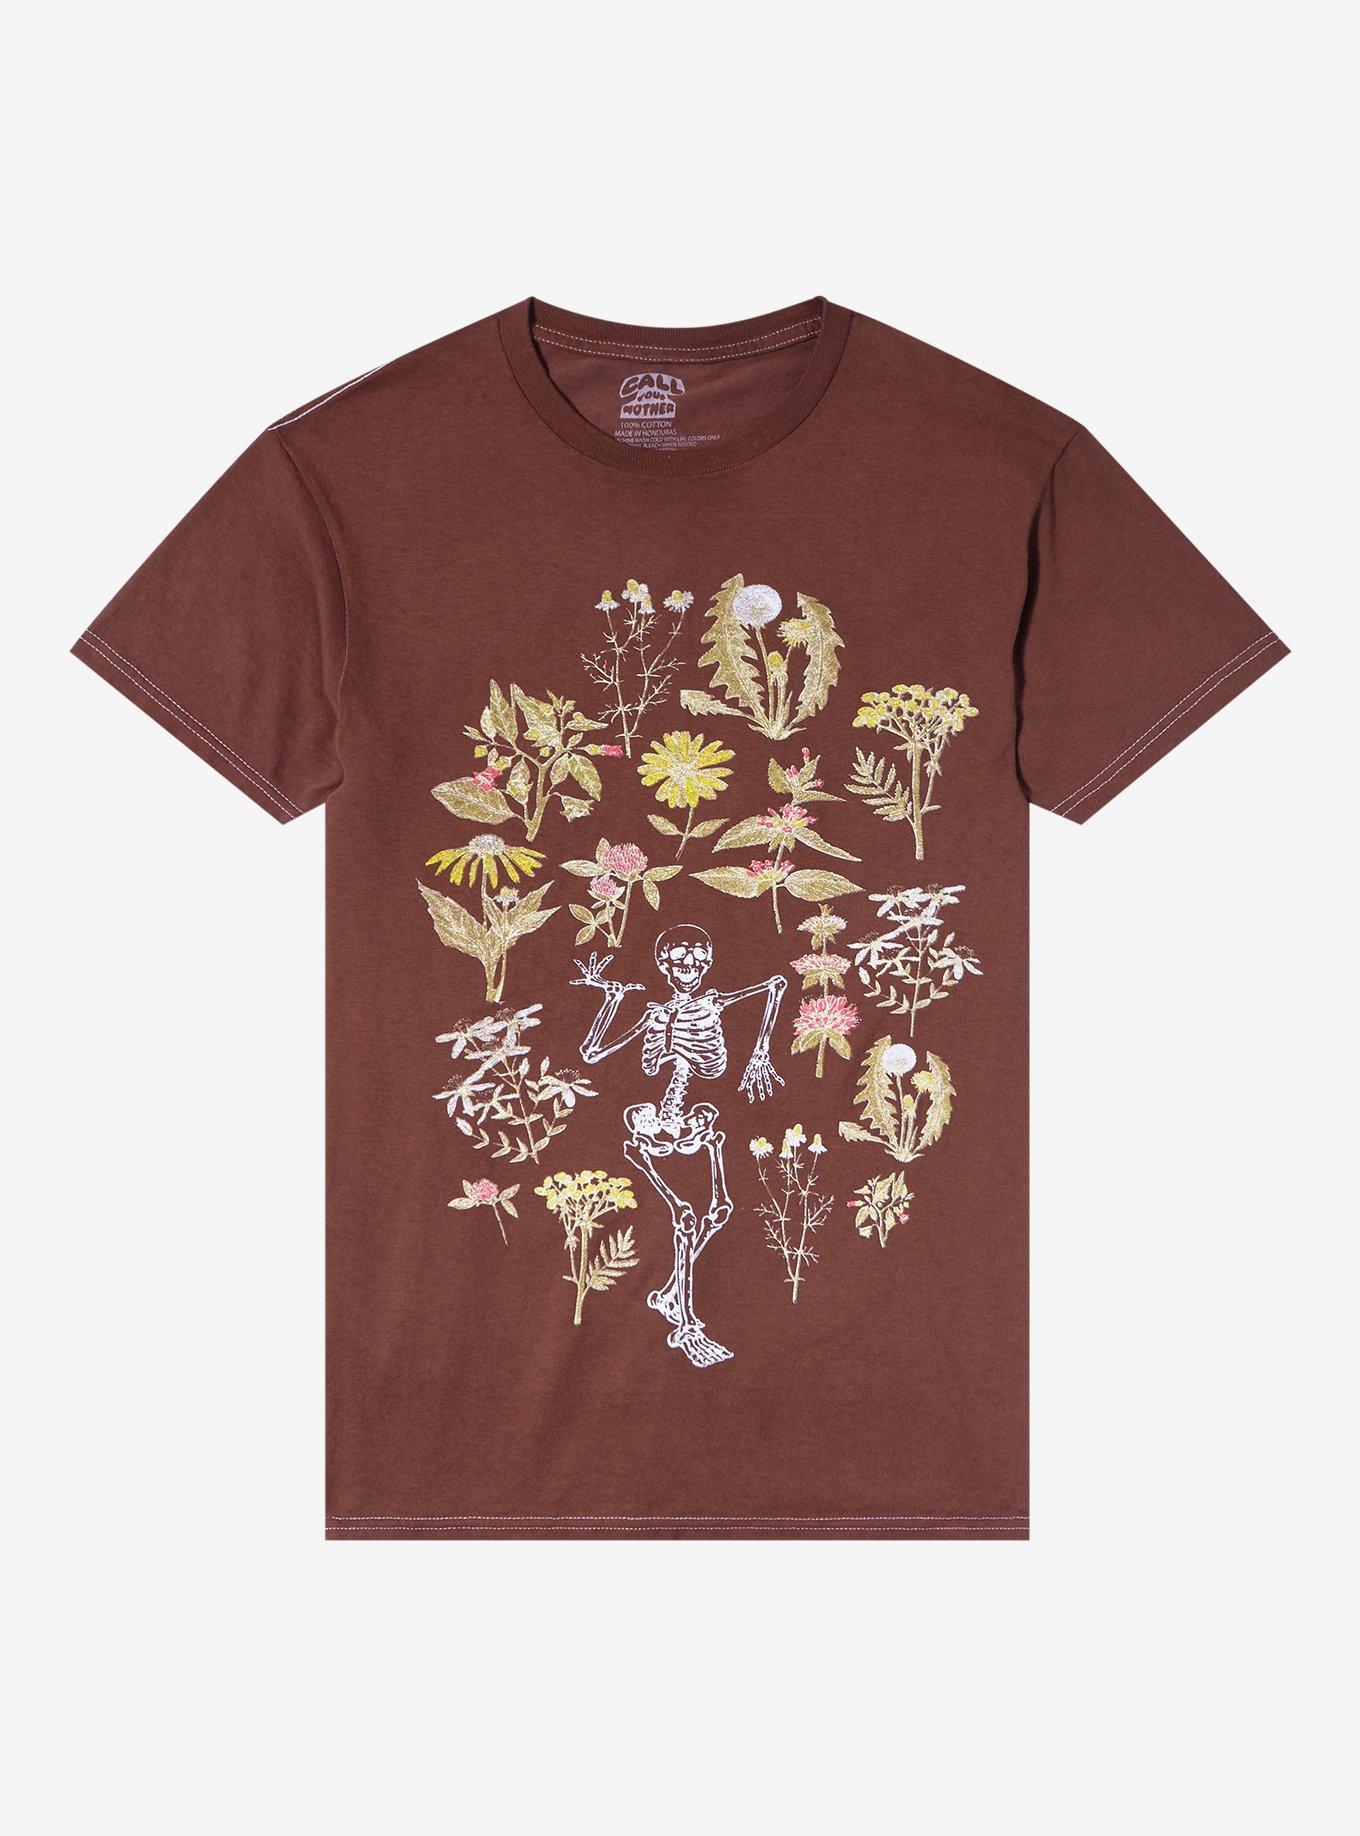 Brown Skeleton Floral Boyfriend Fit Girls T-Shirt By Call Your Mother, MULTI, hi-res